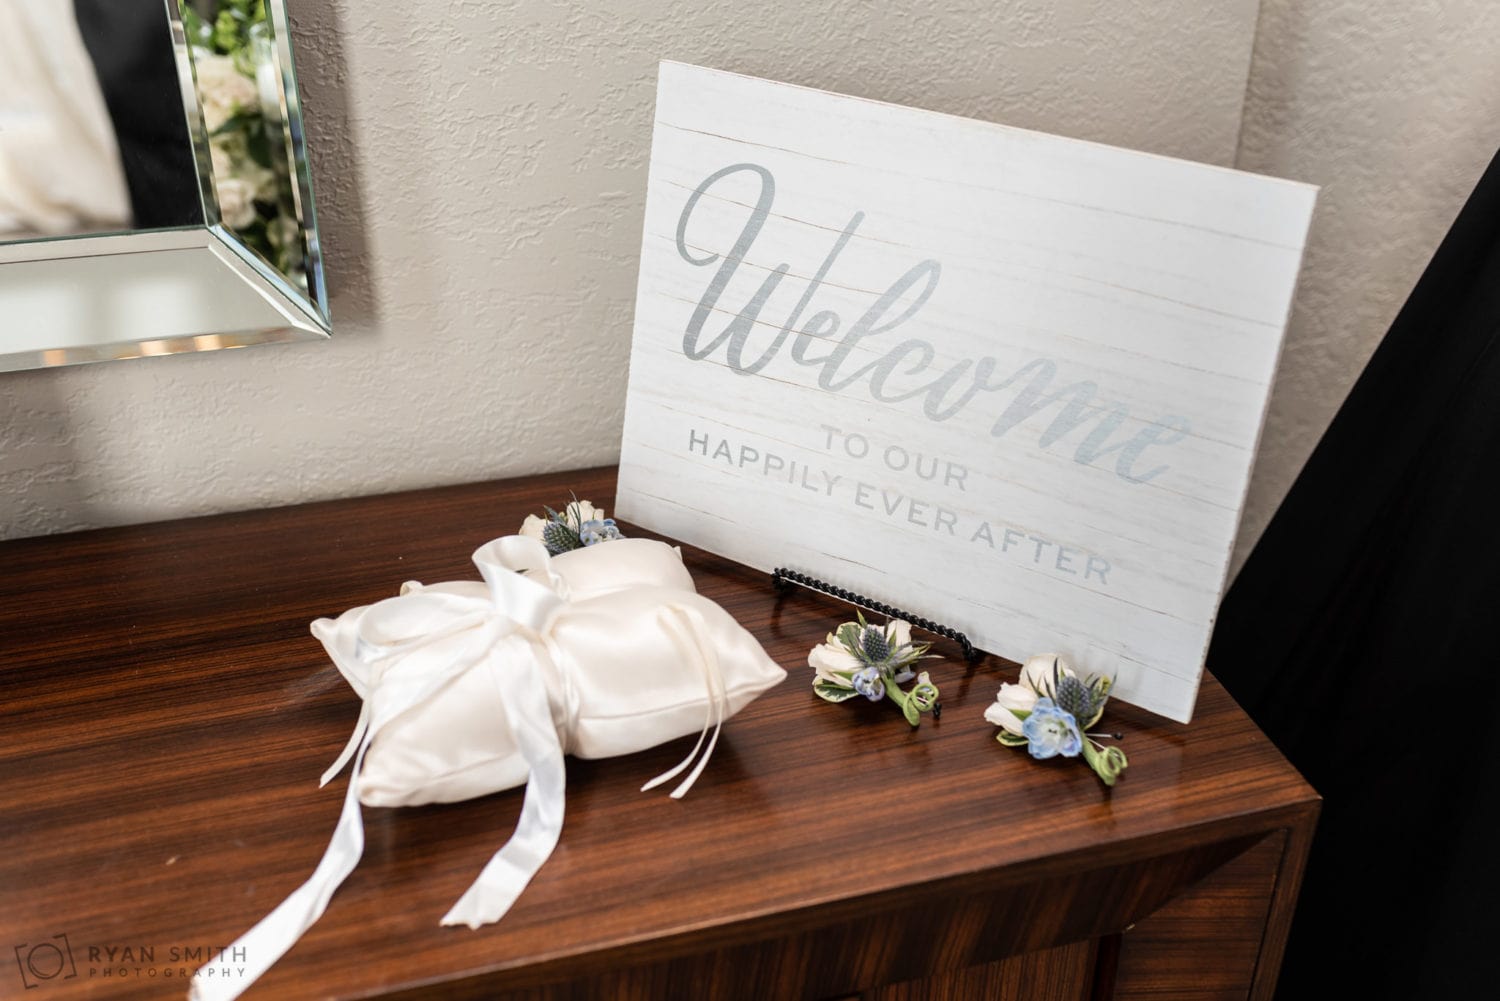 Welcome to the wedding sign Grande Dunes Ocean Club